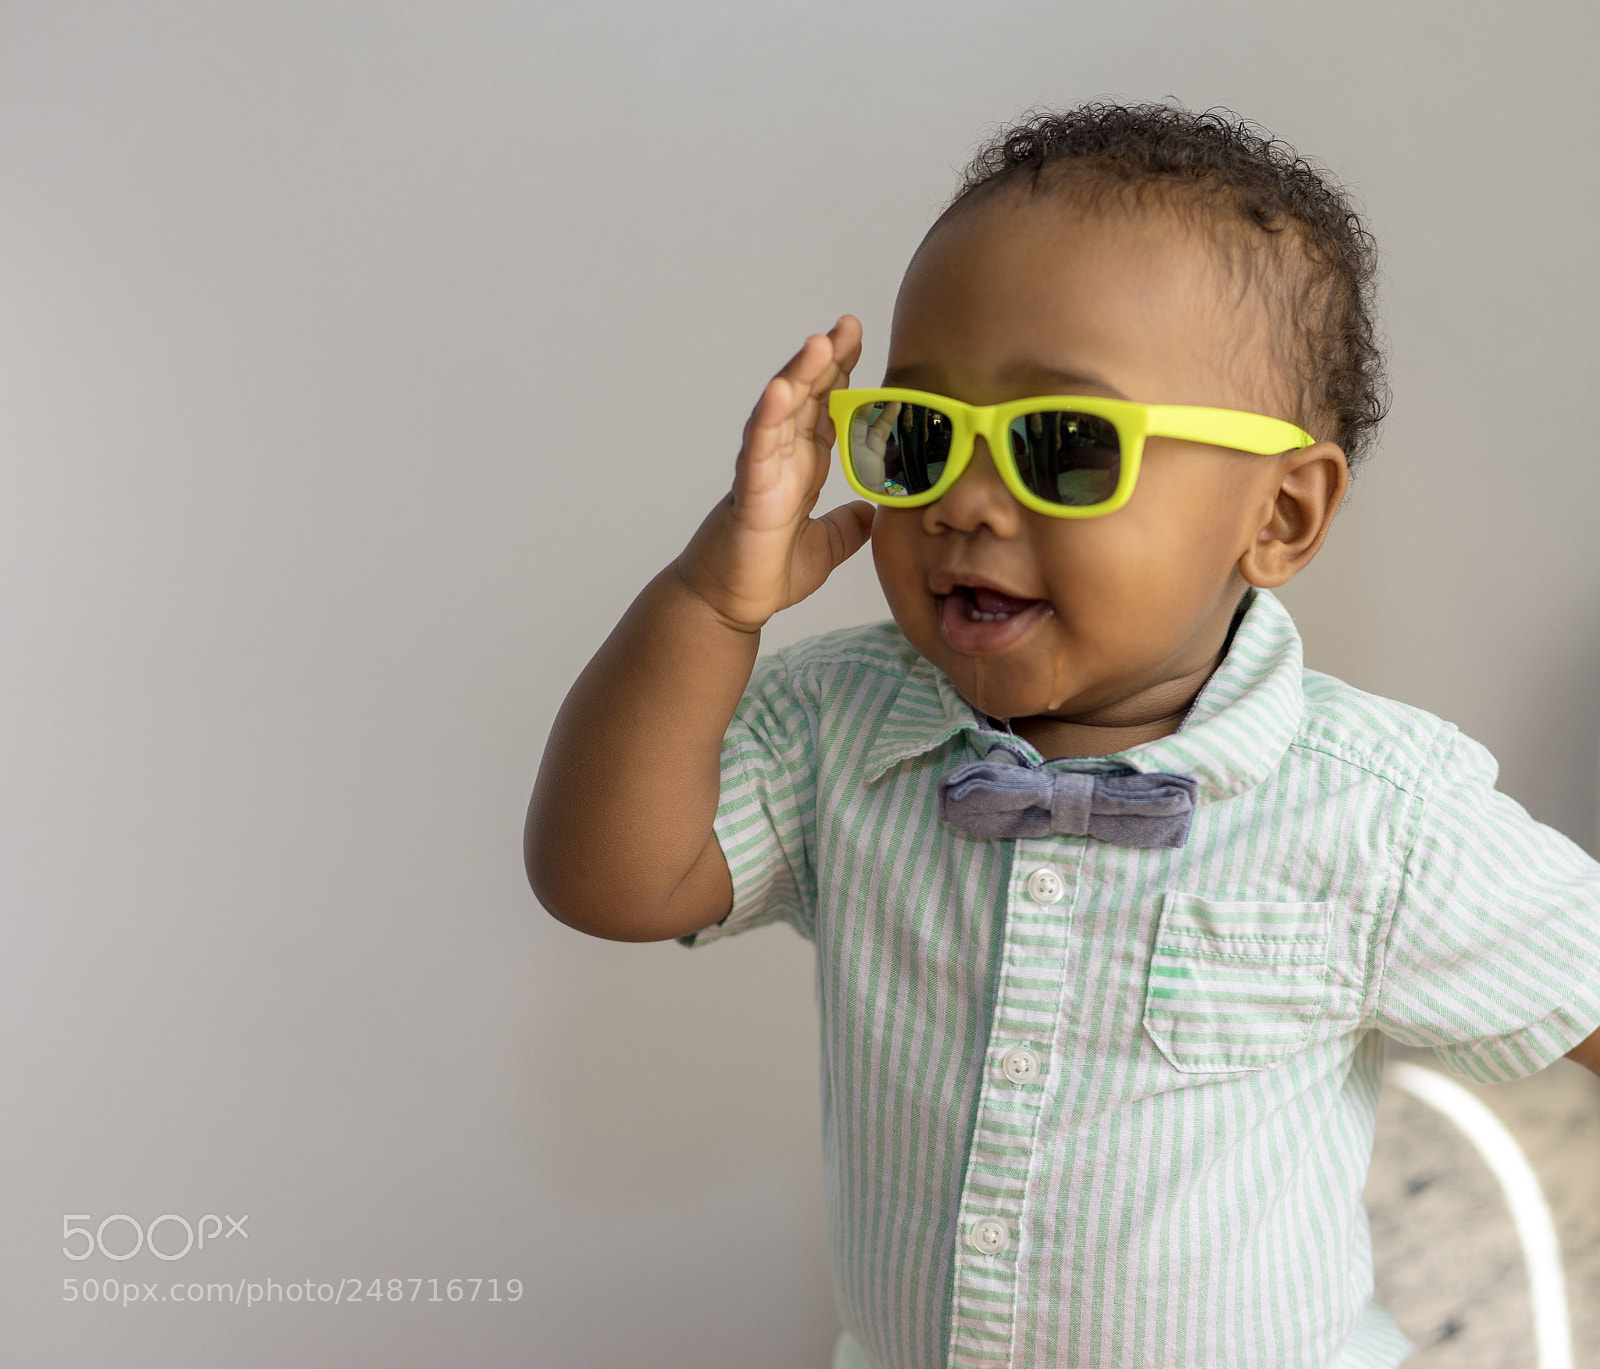 Sony a7 sample photo. Gq baby photography